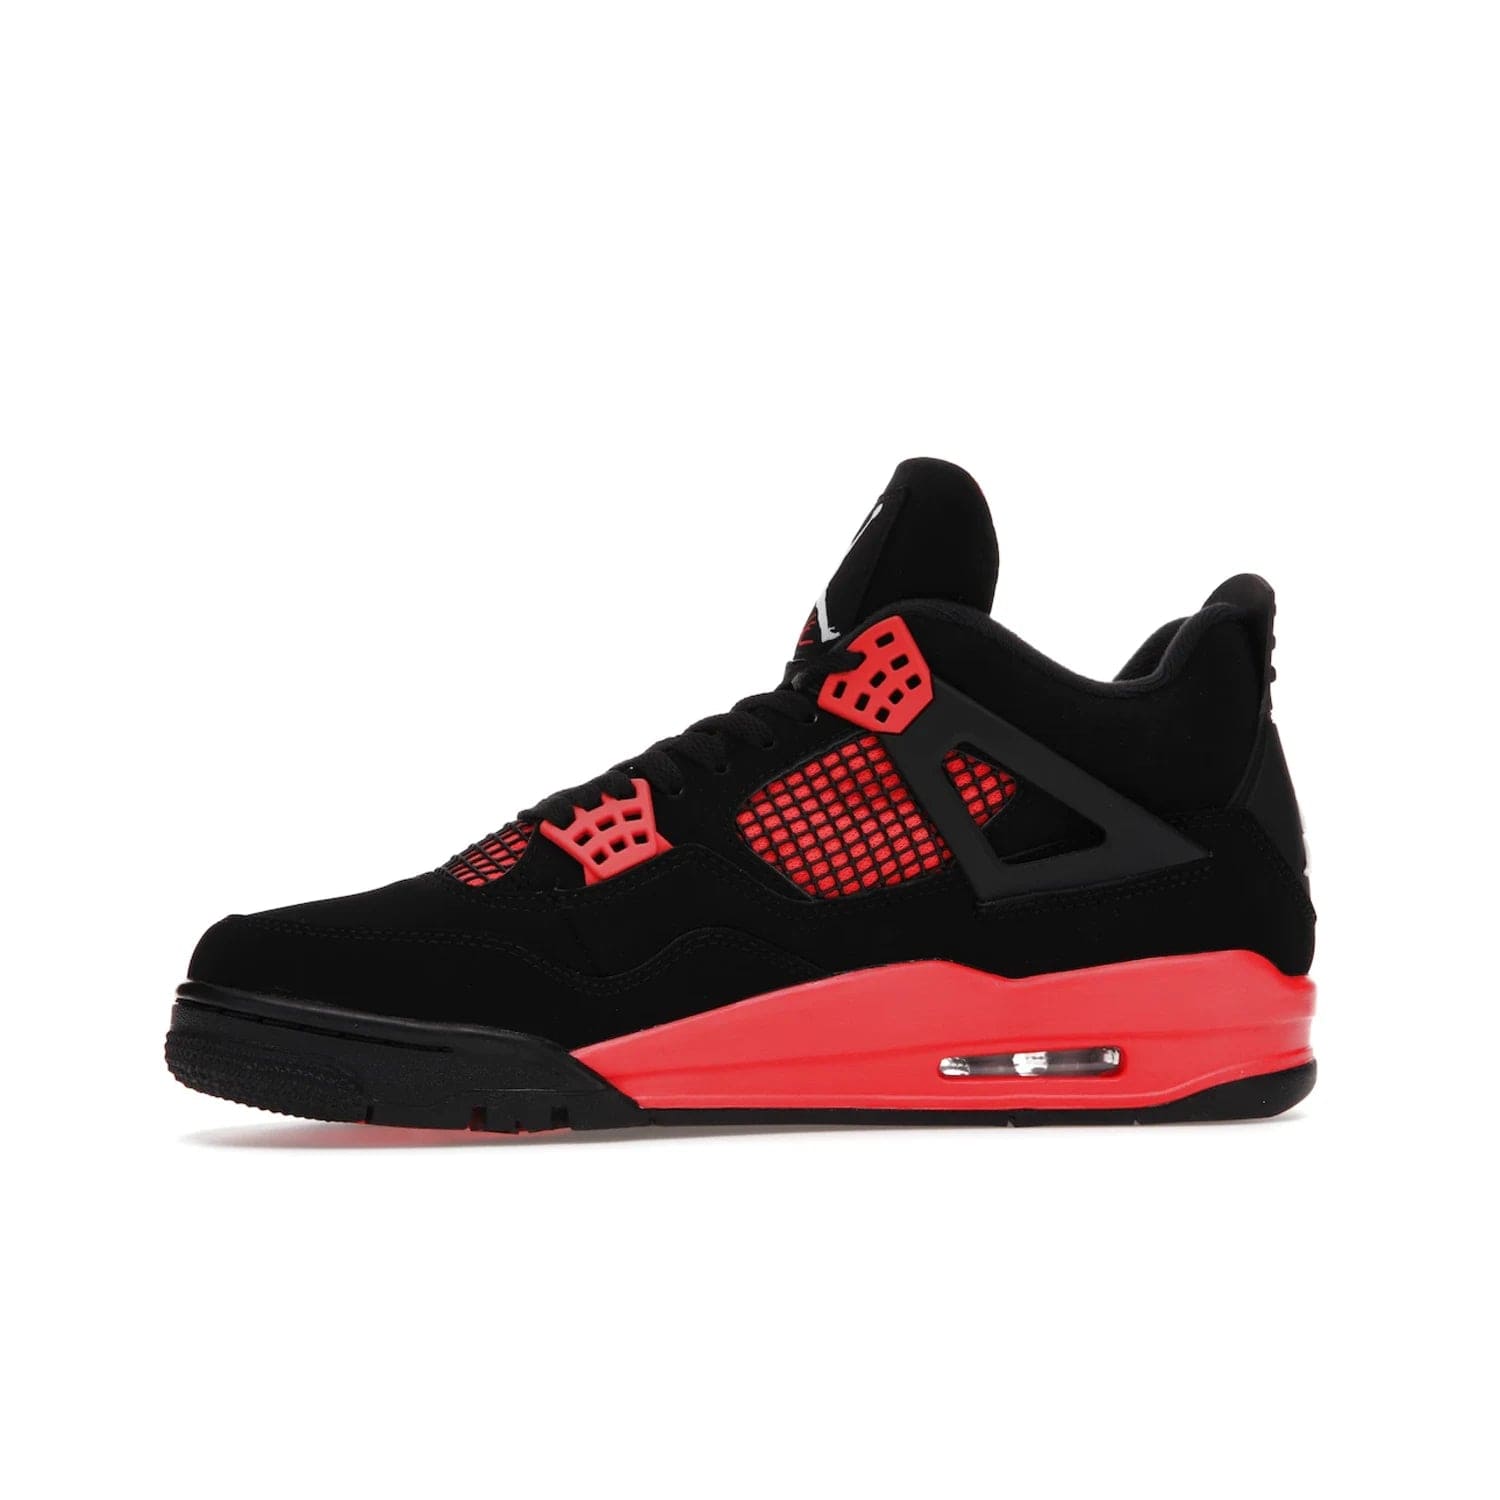 Jordan 4 Retro Red Thunder - Image 18 - Only at www.BallersClubKickz.com - Upscale your footwear with the Air Jordan 4 Retro Red Thunder. Featuring a Durabuck upper, red underlays, signature Flight patch, and vibrant red midsole, this retro sneaker adds style and edge. Releases in January 2022.